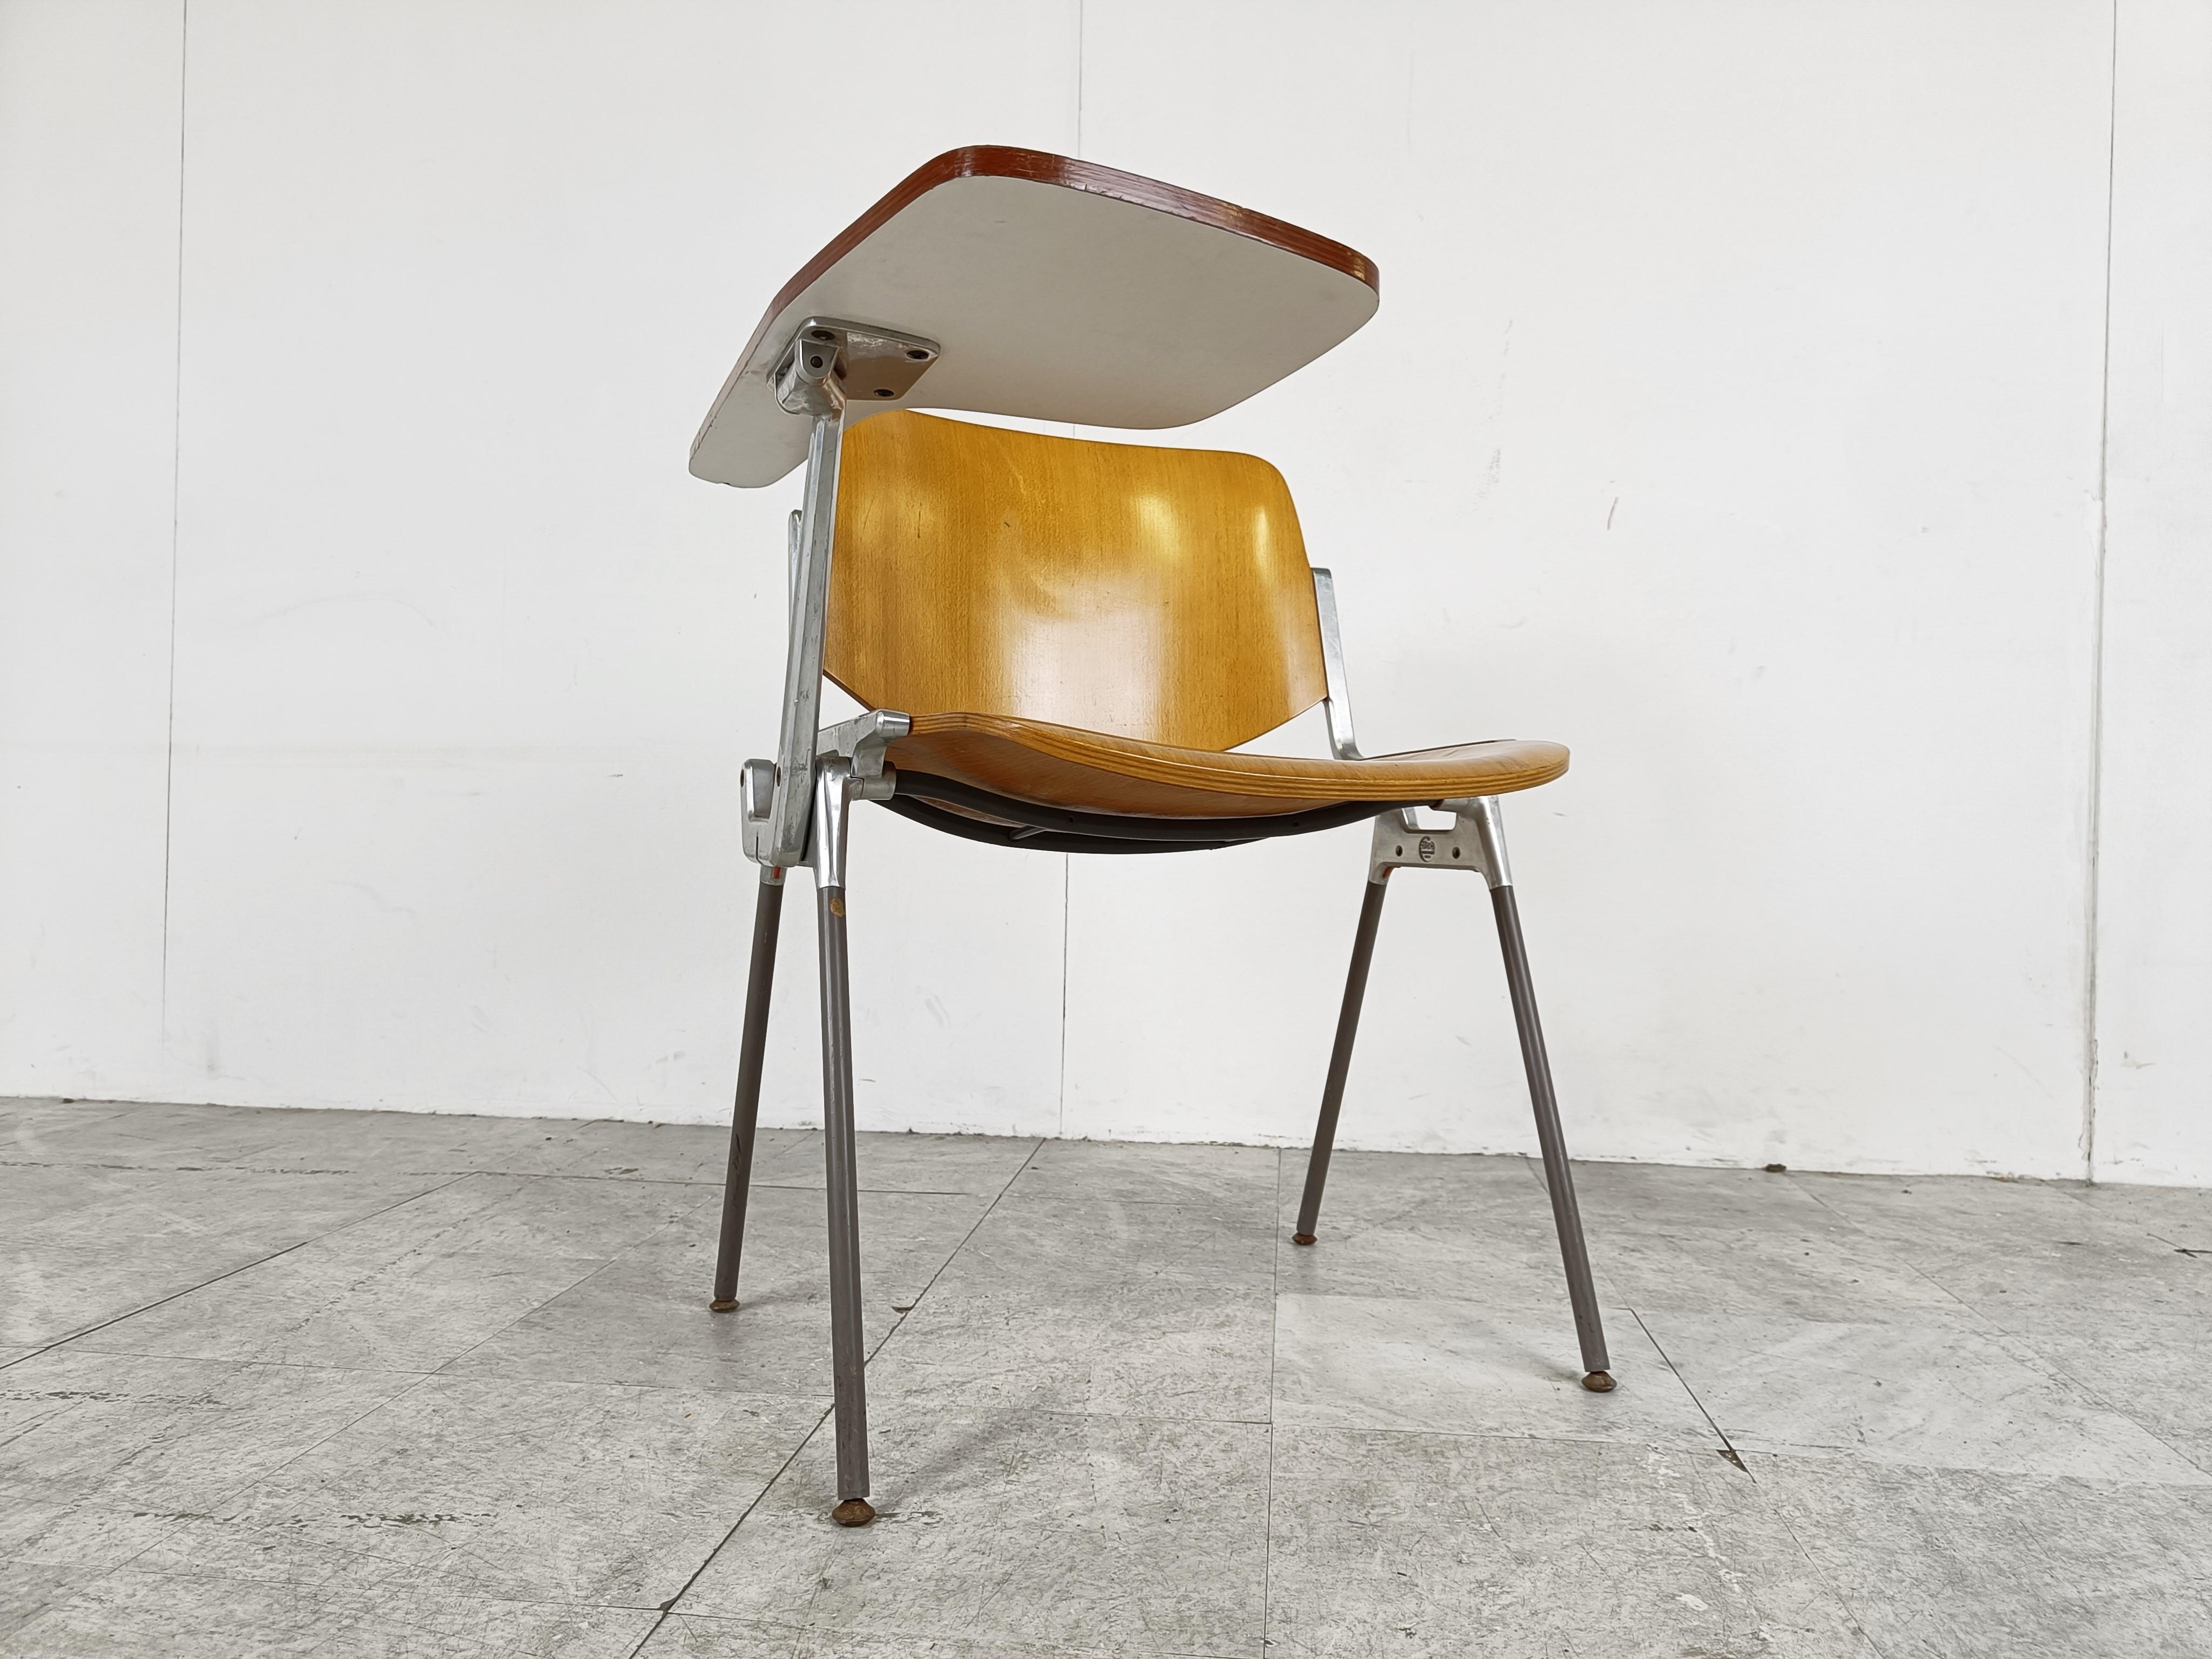 Italian Vintage Dsc 106 Chair by Giancarlo Piretti for Castelli with Folding Table, 1970 For Sale